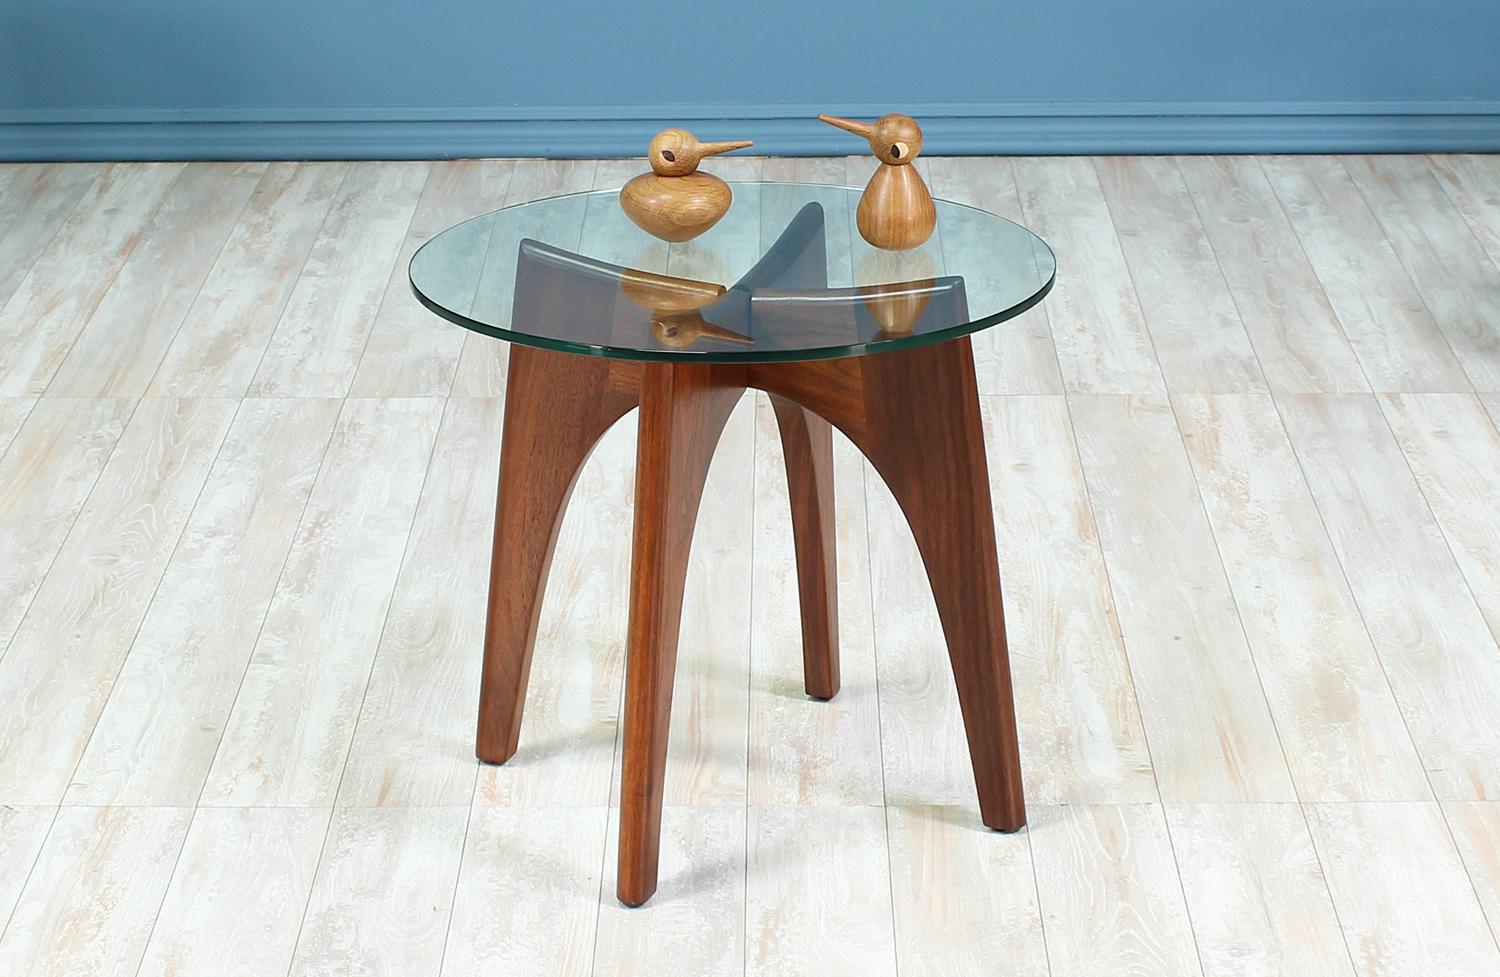 Side table designed by Adrian Pearsall for Craft Associates in the United States circa 1960’s. This beautiful table features an interlocked “X” shaped walnut wood base visible through the new glass top. The versatility of this table allows it to be